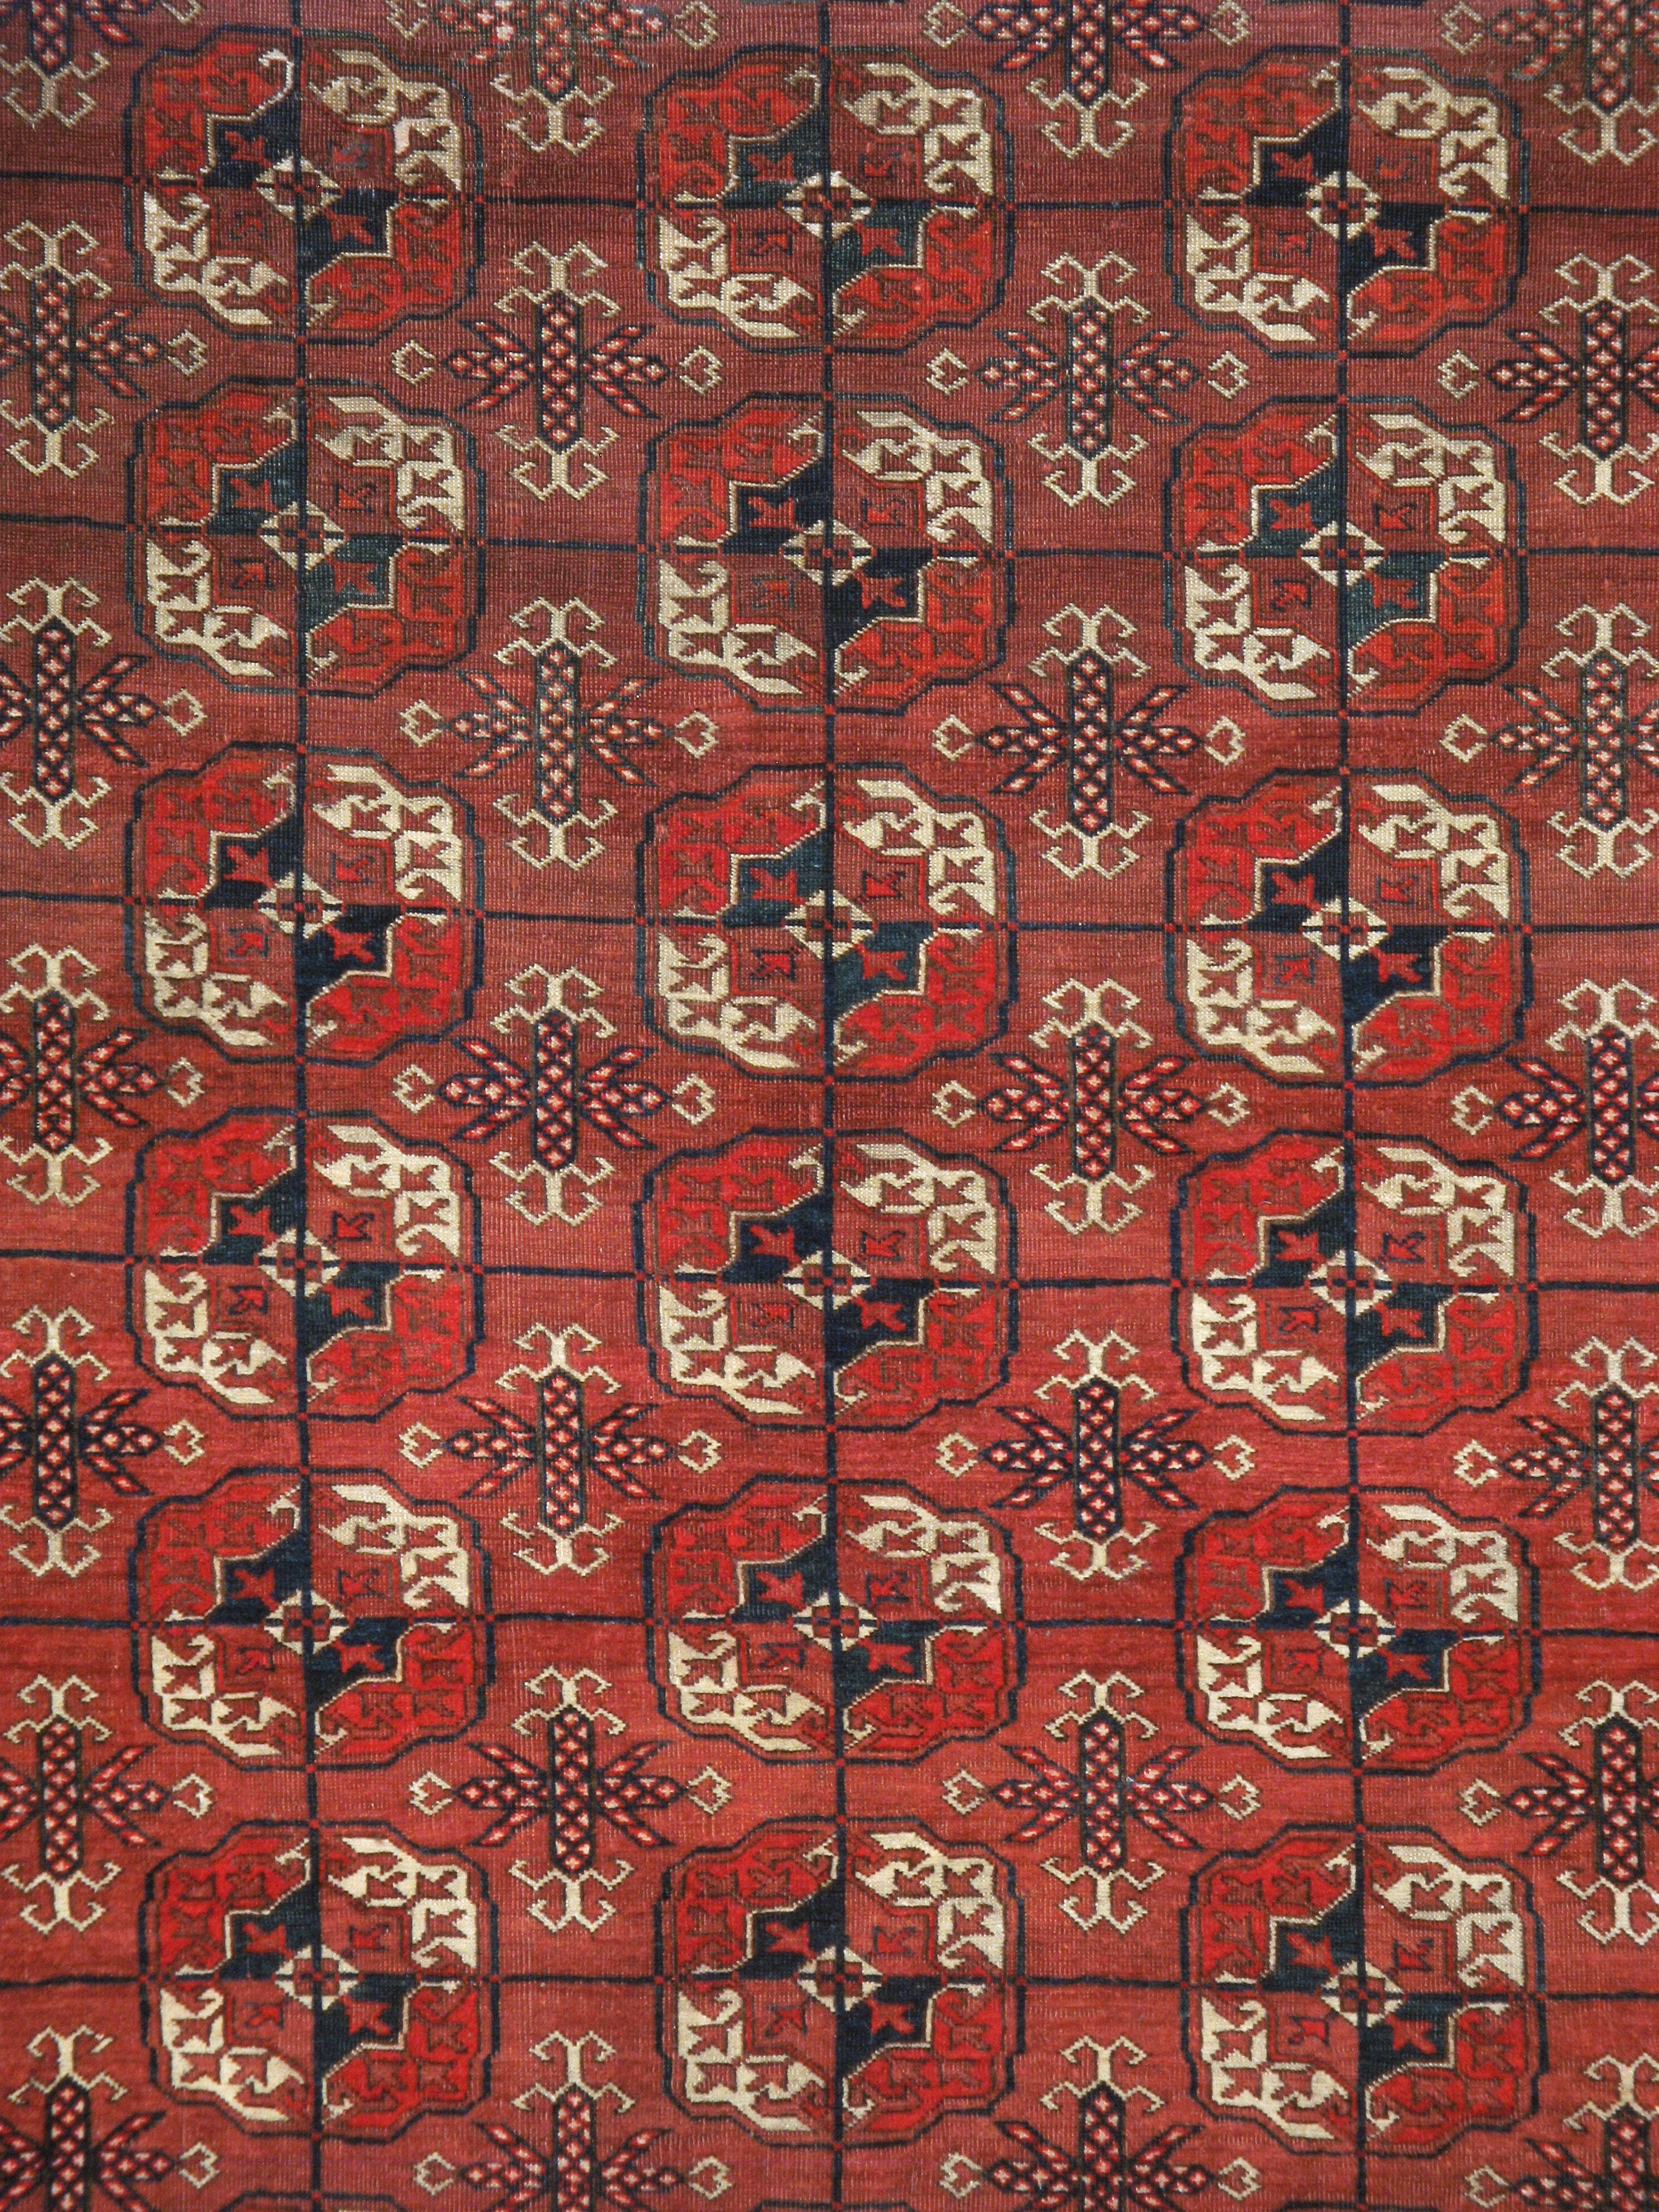 An antique Central Asian Tekke rug. From the most important Turkmen weaving tribe in Turkmenistan, this blood red nomadic rug displays five columns of eleven characteristic gul (flower) medallions within a color matched border of rayed octagons